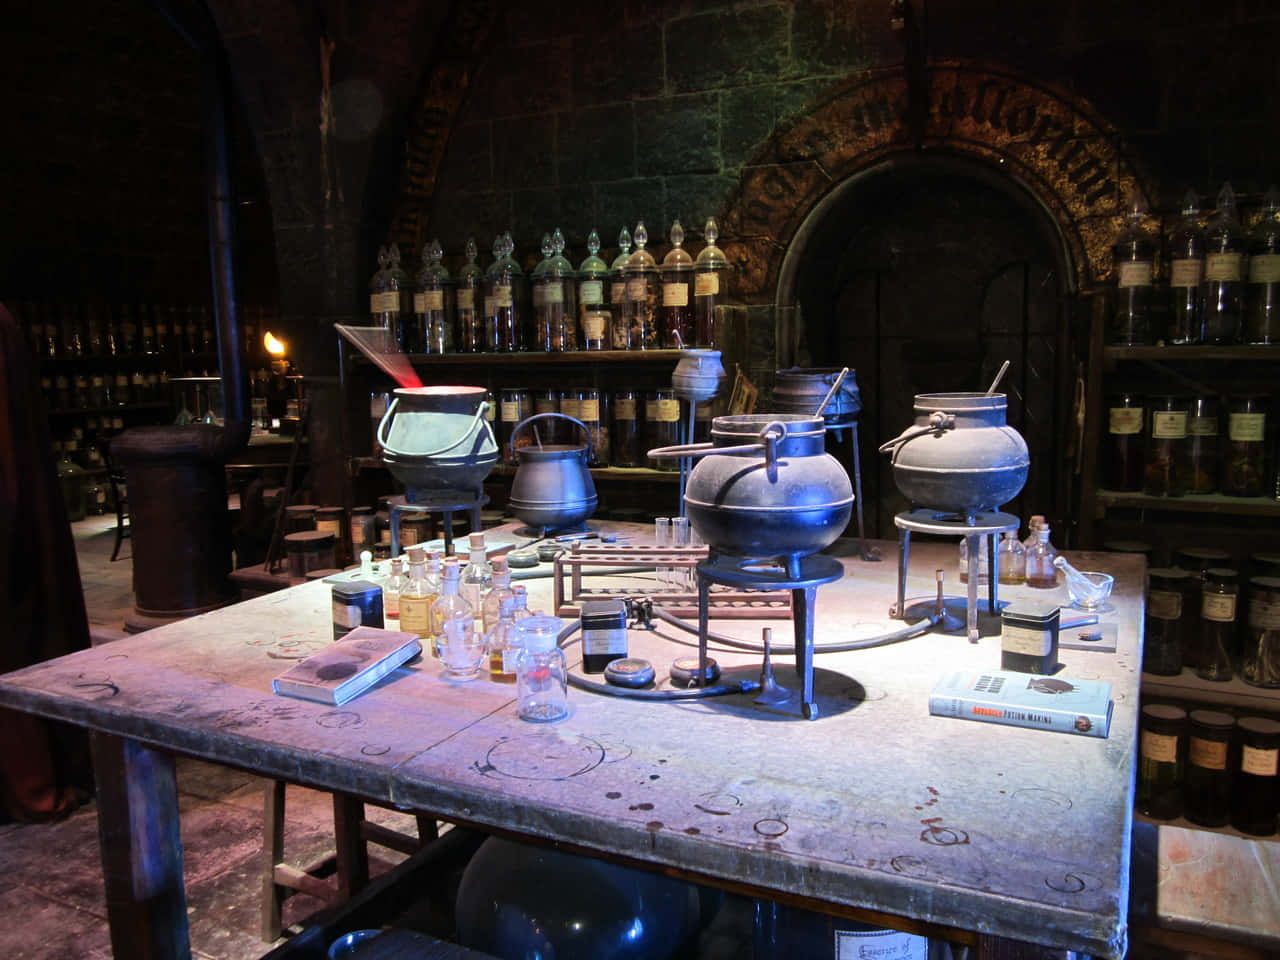 Get ready to explore the dark arts in this Hogwarts classroom! Wallpaper